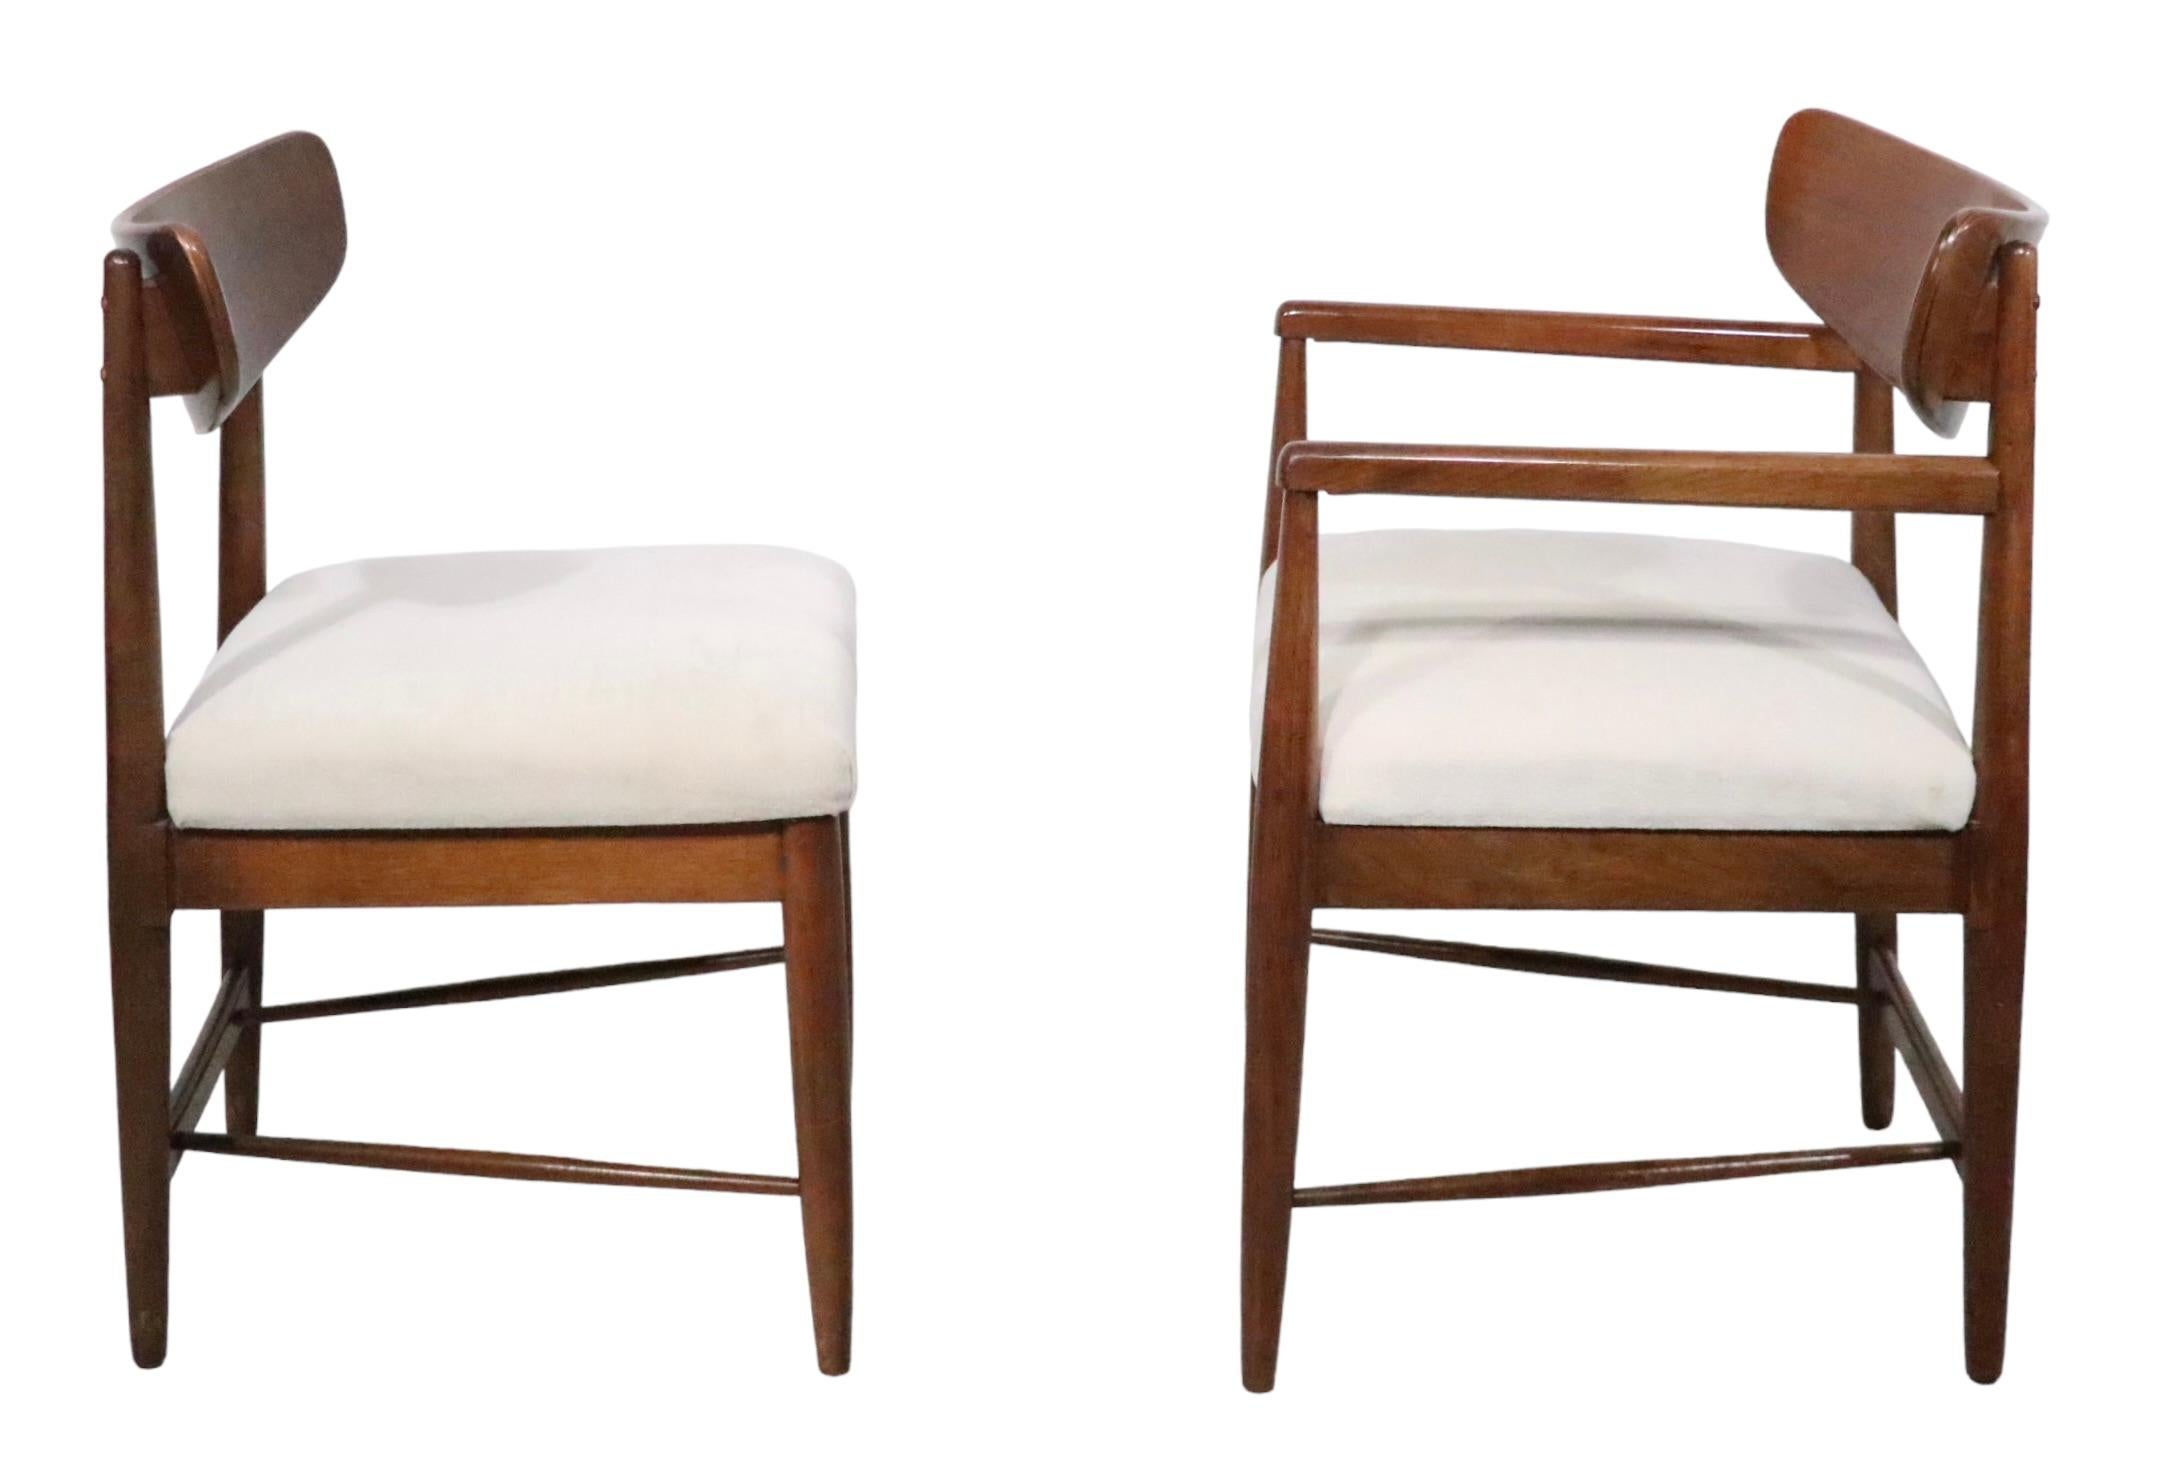 Chic architectural set of Mid Century Modern dining chairs designed by Merton Gershun for American of Martinsville as part of their classic Dania series, circa 1950-1960s. This impressive set includes two arm, and for side chairs, all of which are